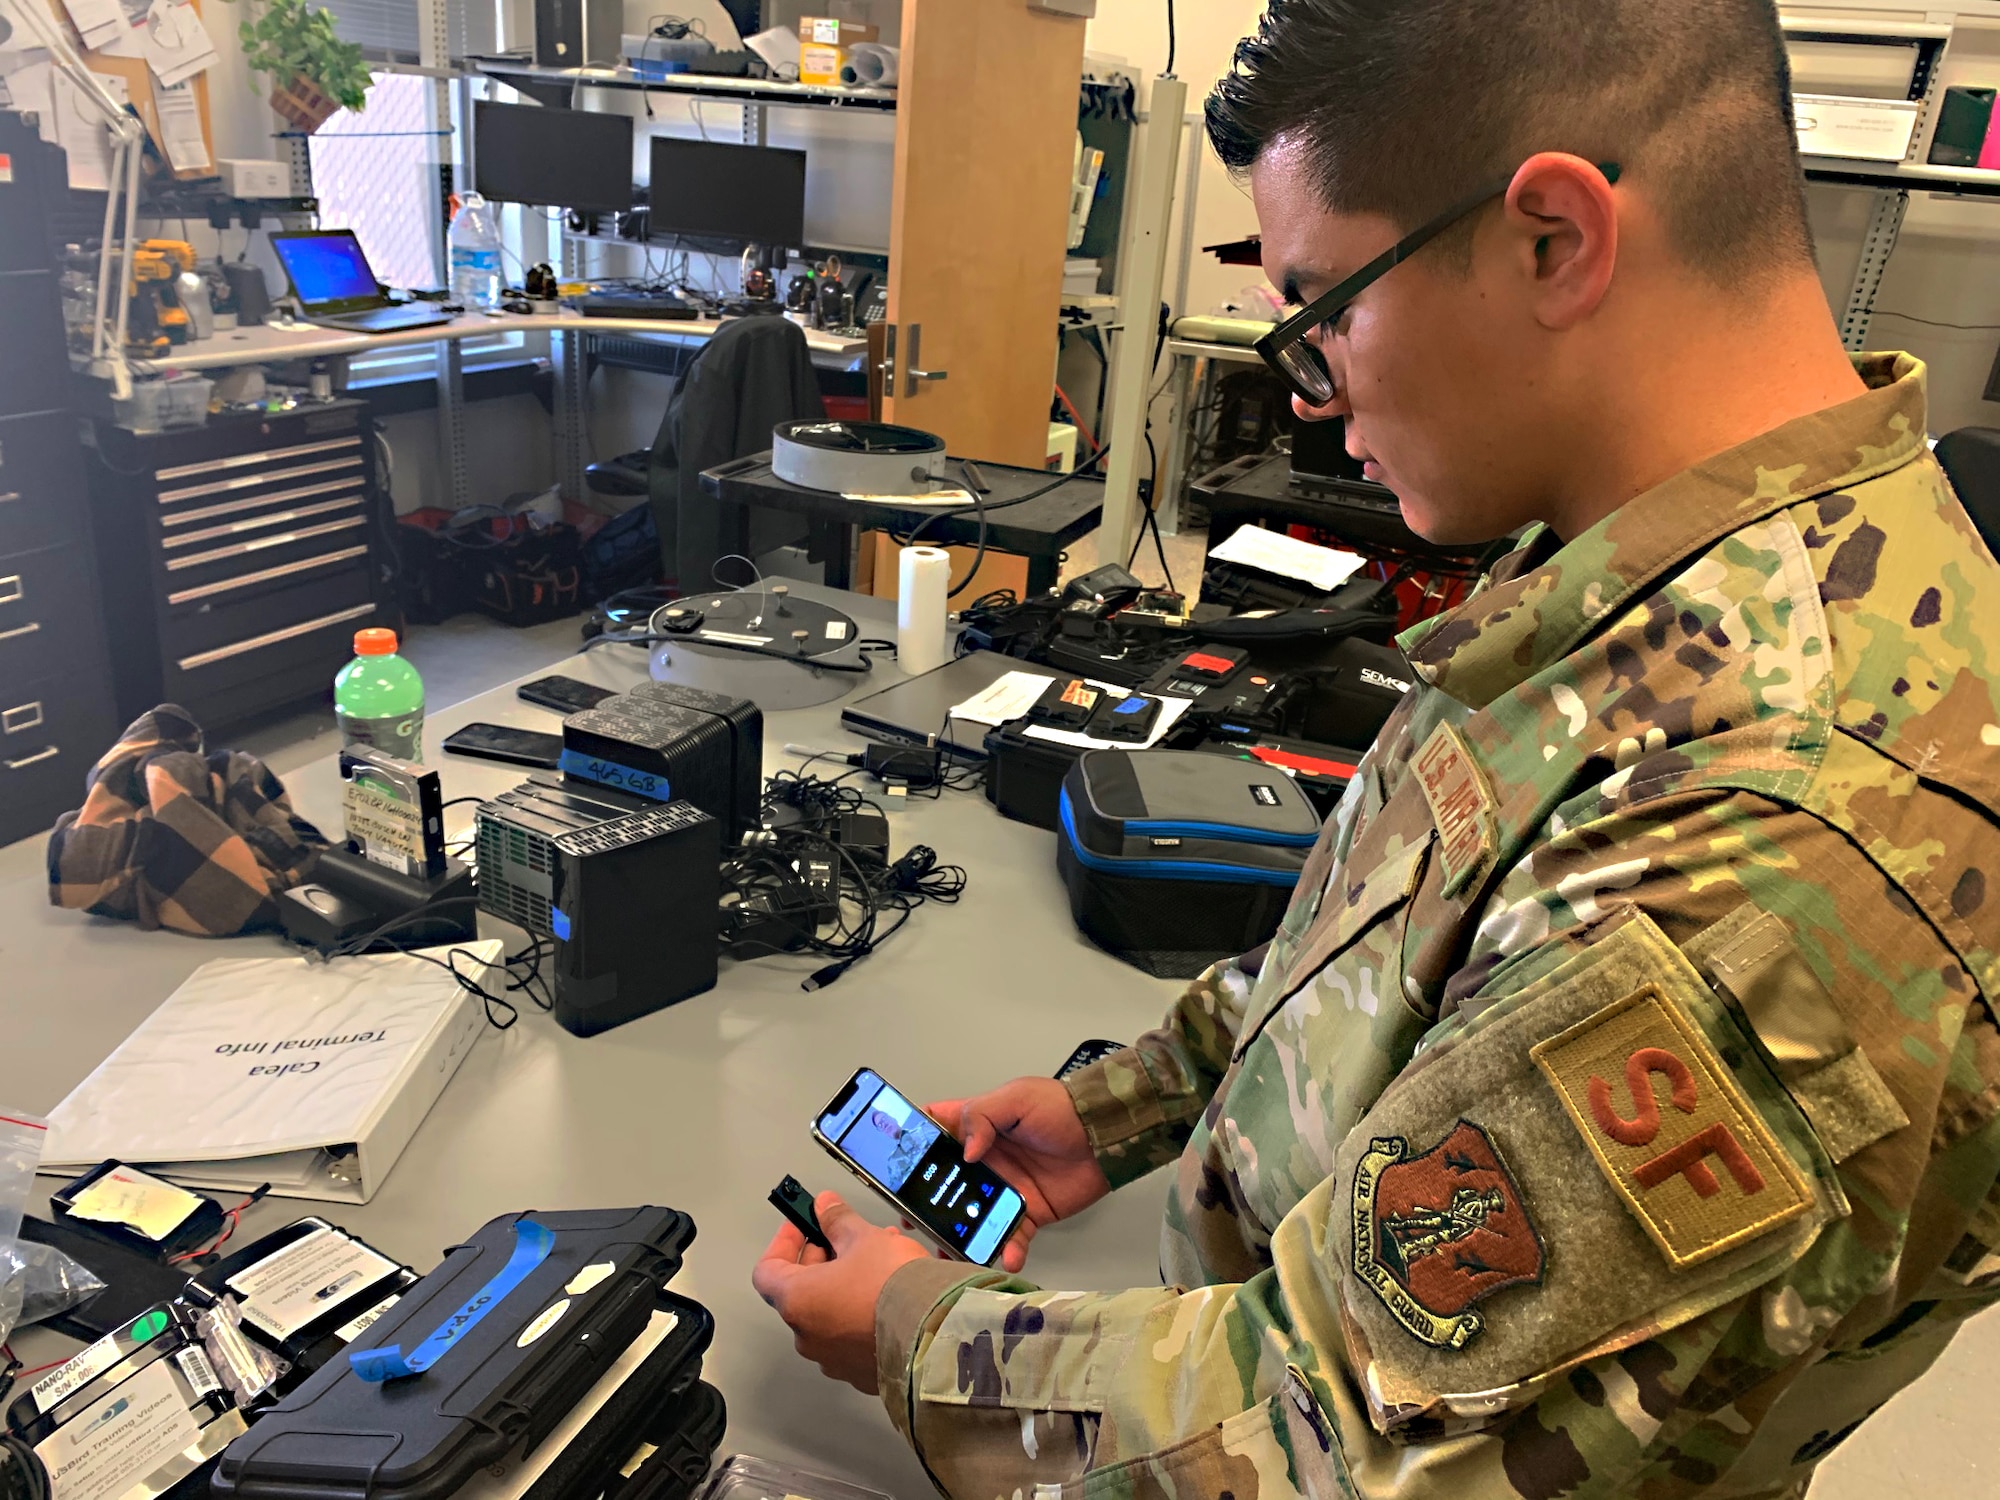 Staff Sgt. Daniel Pando,Texas National Guard Joint Counterdrug Task Force communications support member, works on cutting-edge electronic equipment to help the Homeland Security Investigations Technical Operations Unit catch drug trafficking organizations in El Paso, Texas. Texas Counterdrug has supported federal, state and local law enforcement throughout the state for more than 30 years.